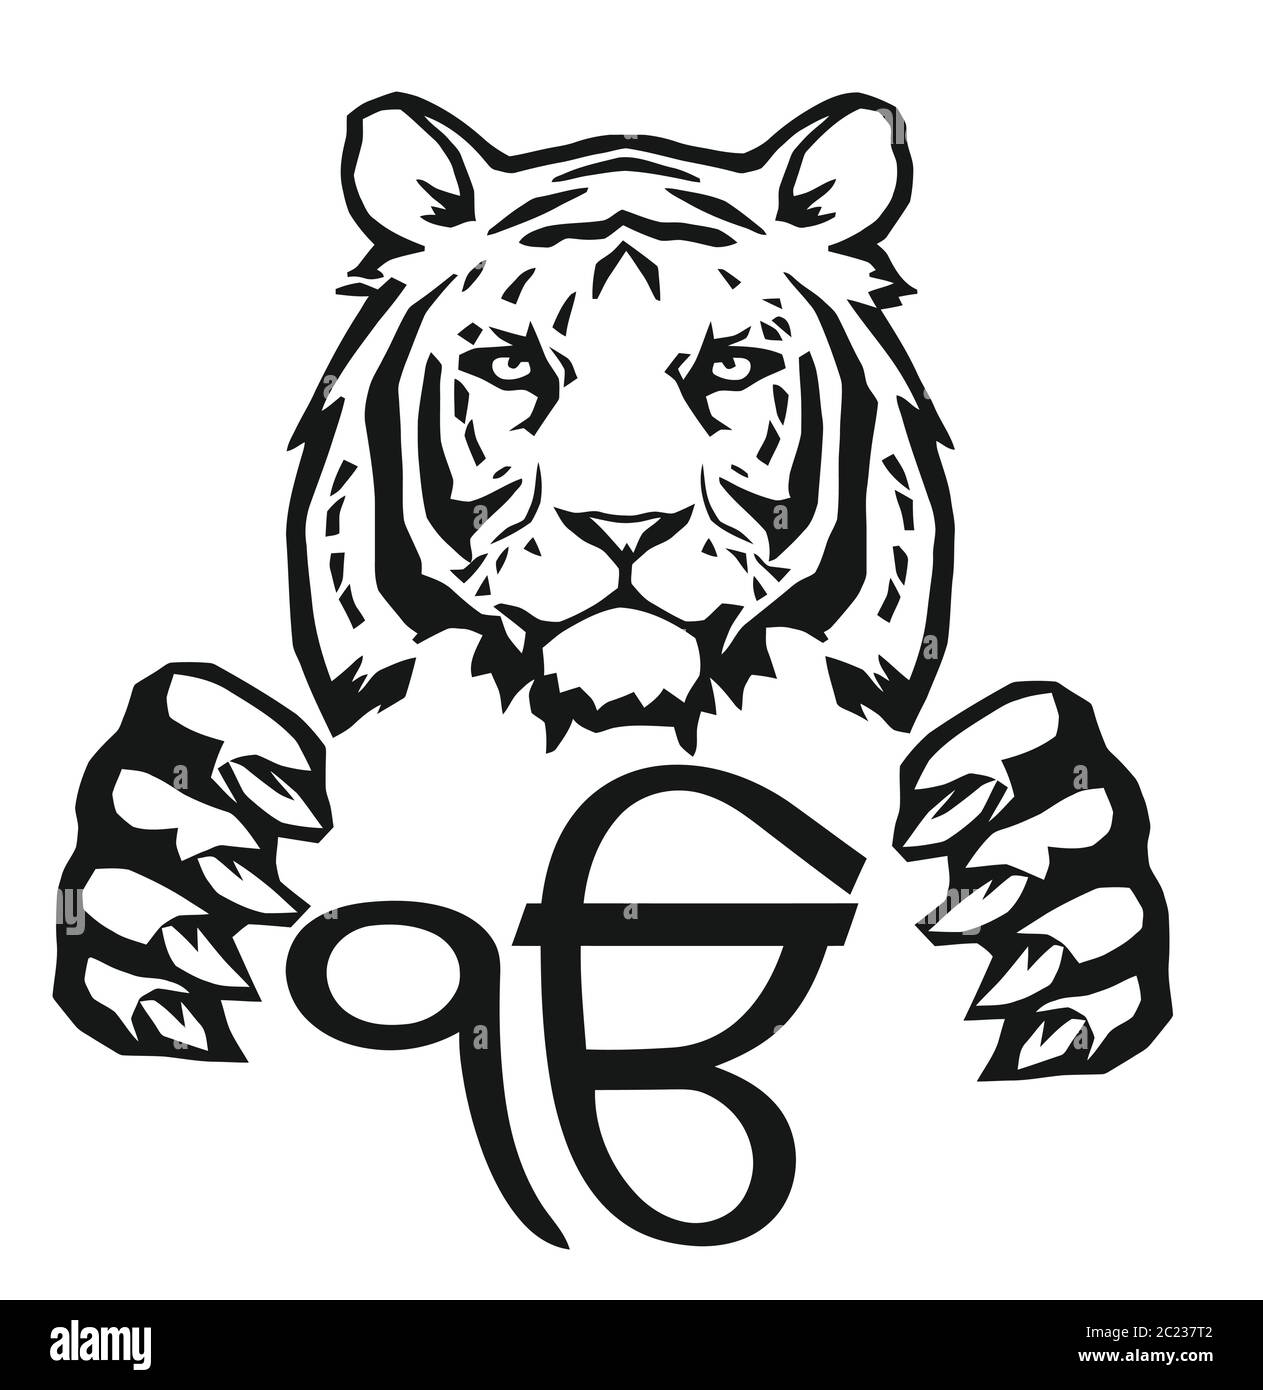 The Tiger and the most significant symbol of Sikhism - Sign Ek Onkar, drawing for tattoo, on a white background, vector Stock Vector